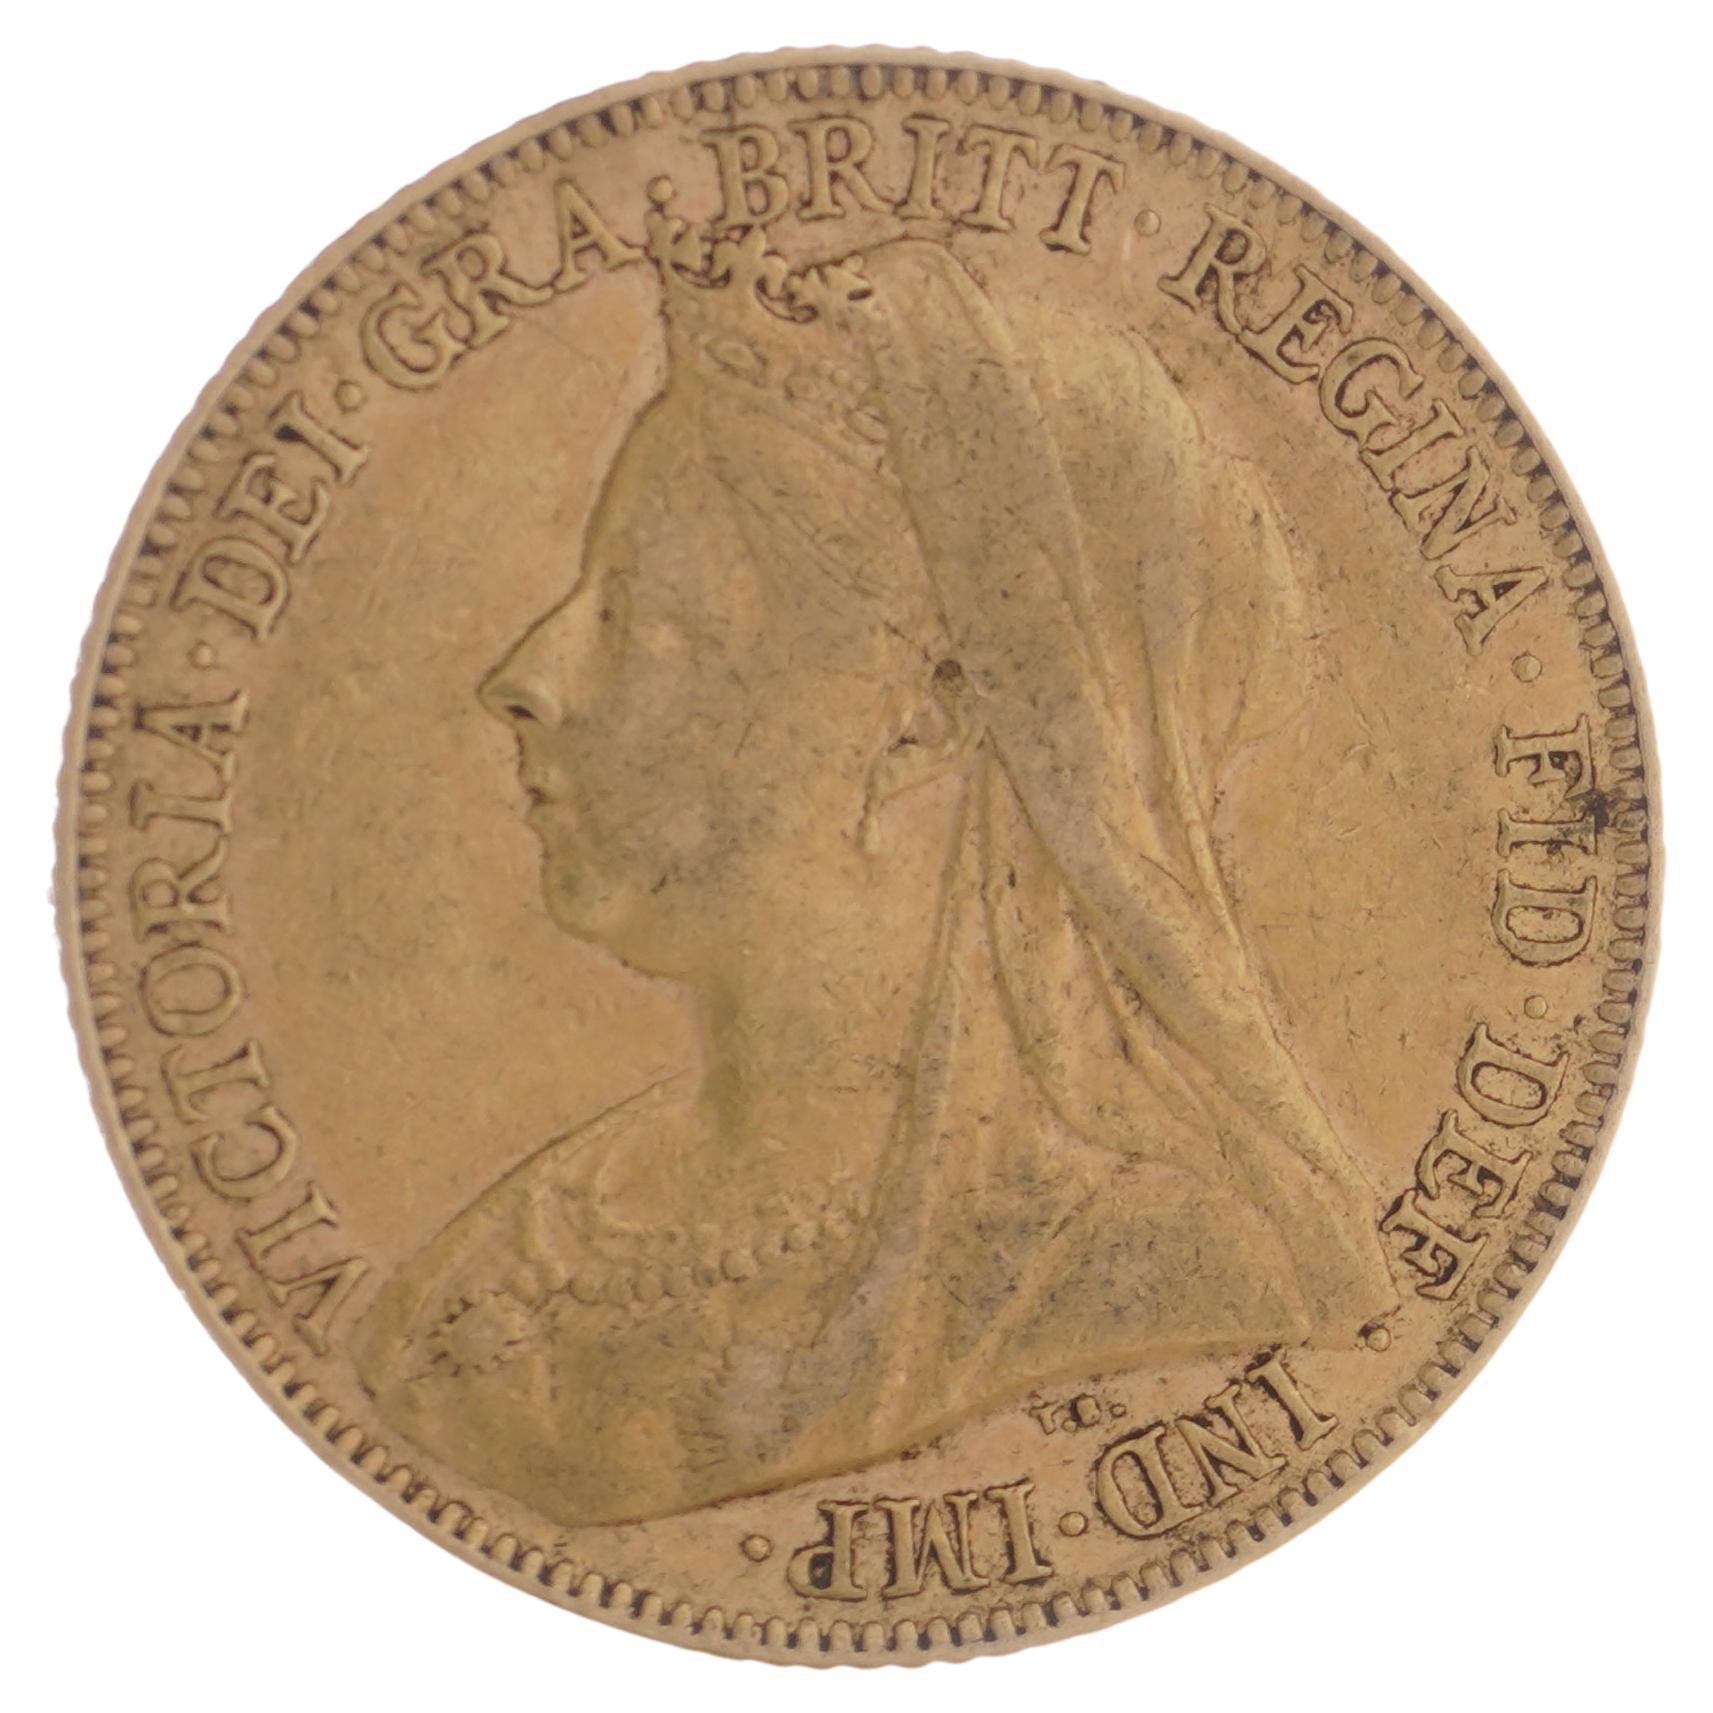 1900 gold Sovereign - with the Queen Victoria old (Veiled) head design For Sale